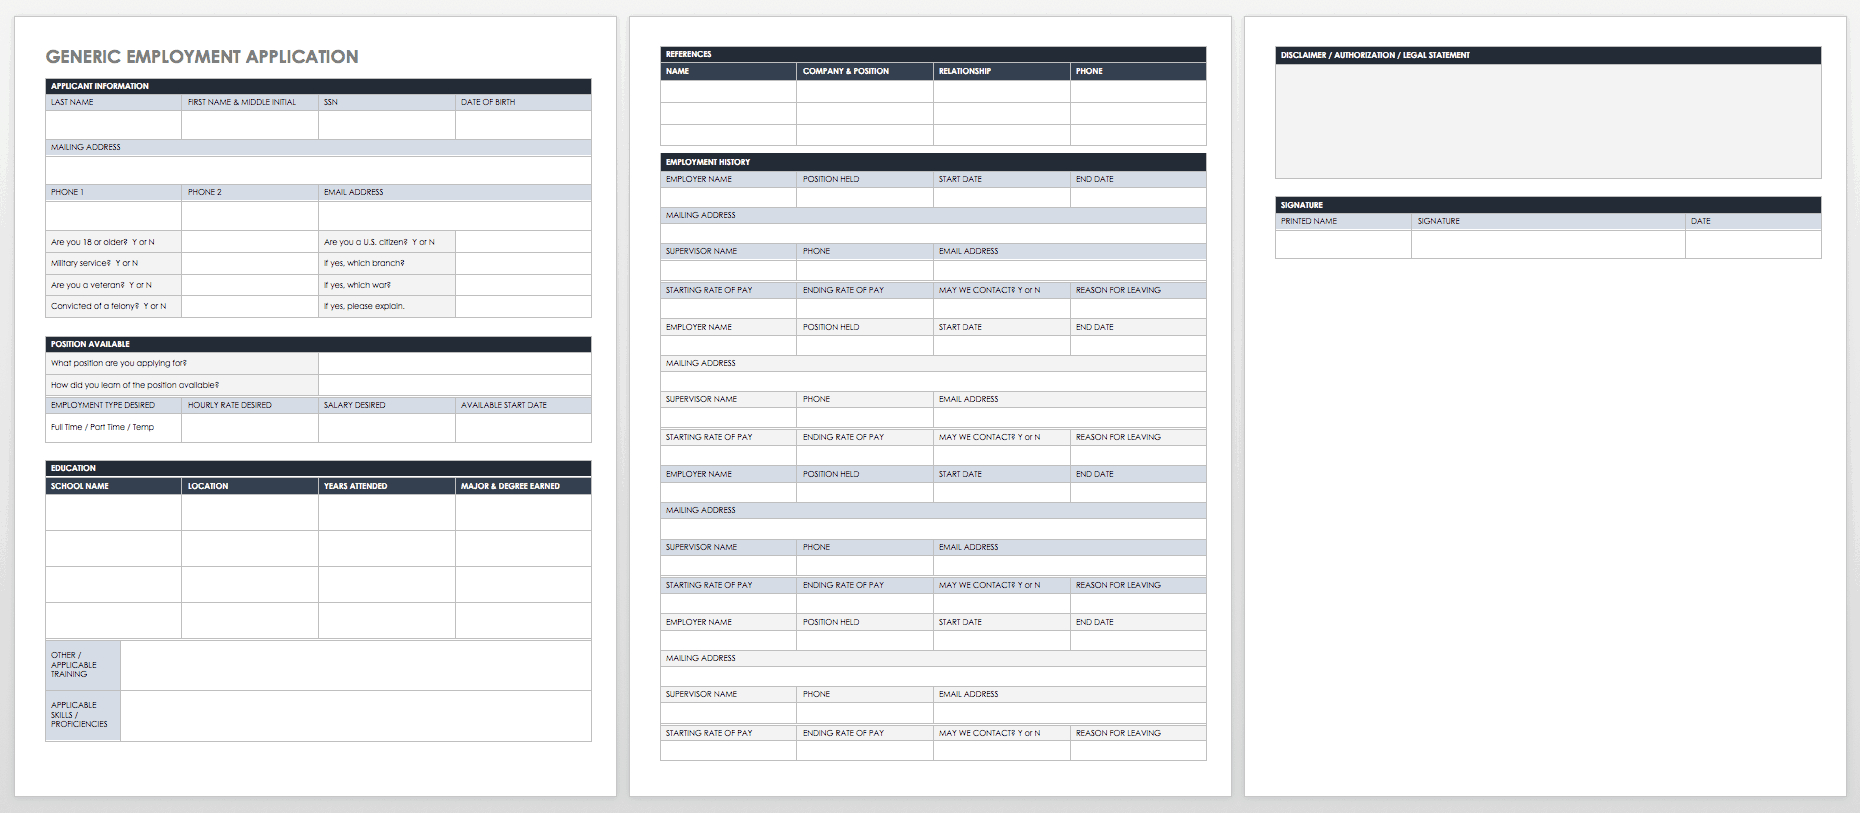 Free Employment Application Templates | Smartsheet Throughout Employment Application Template Microsoft Word